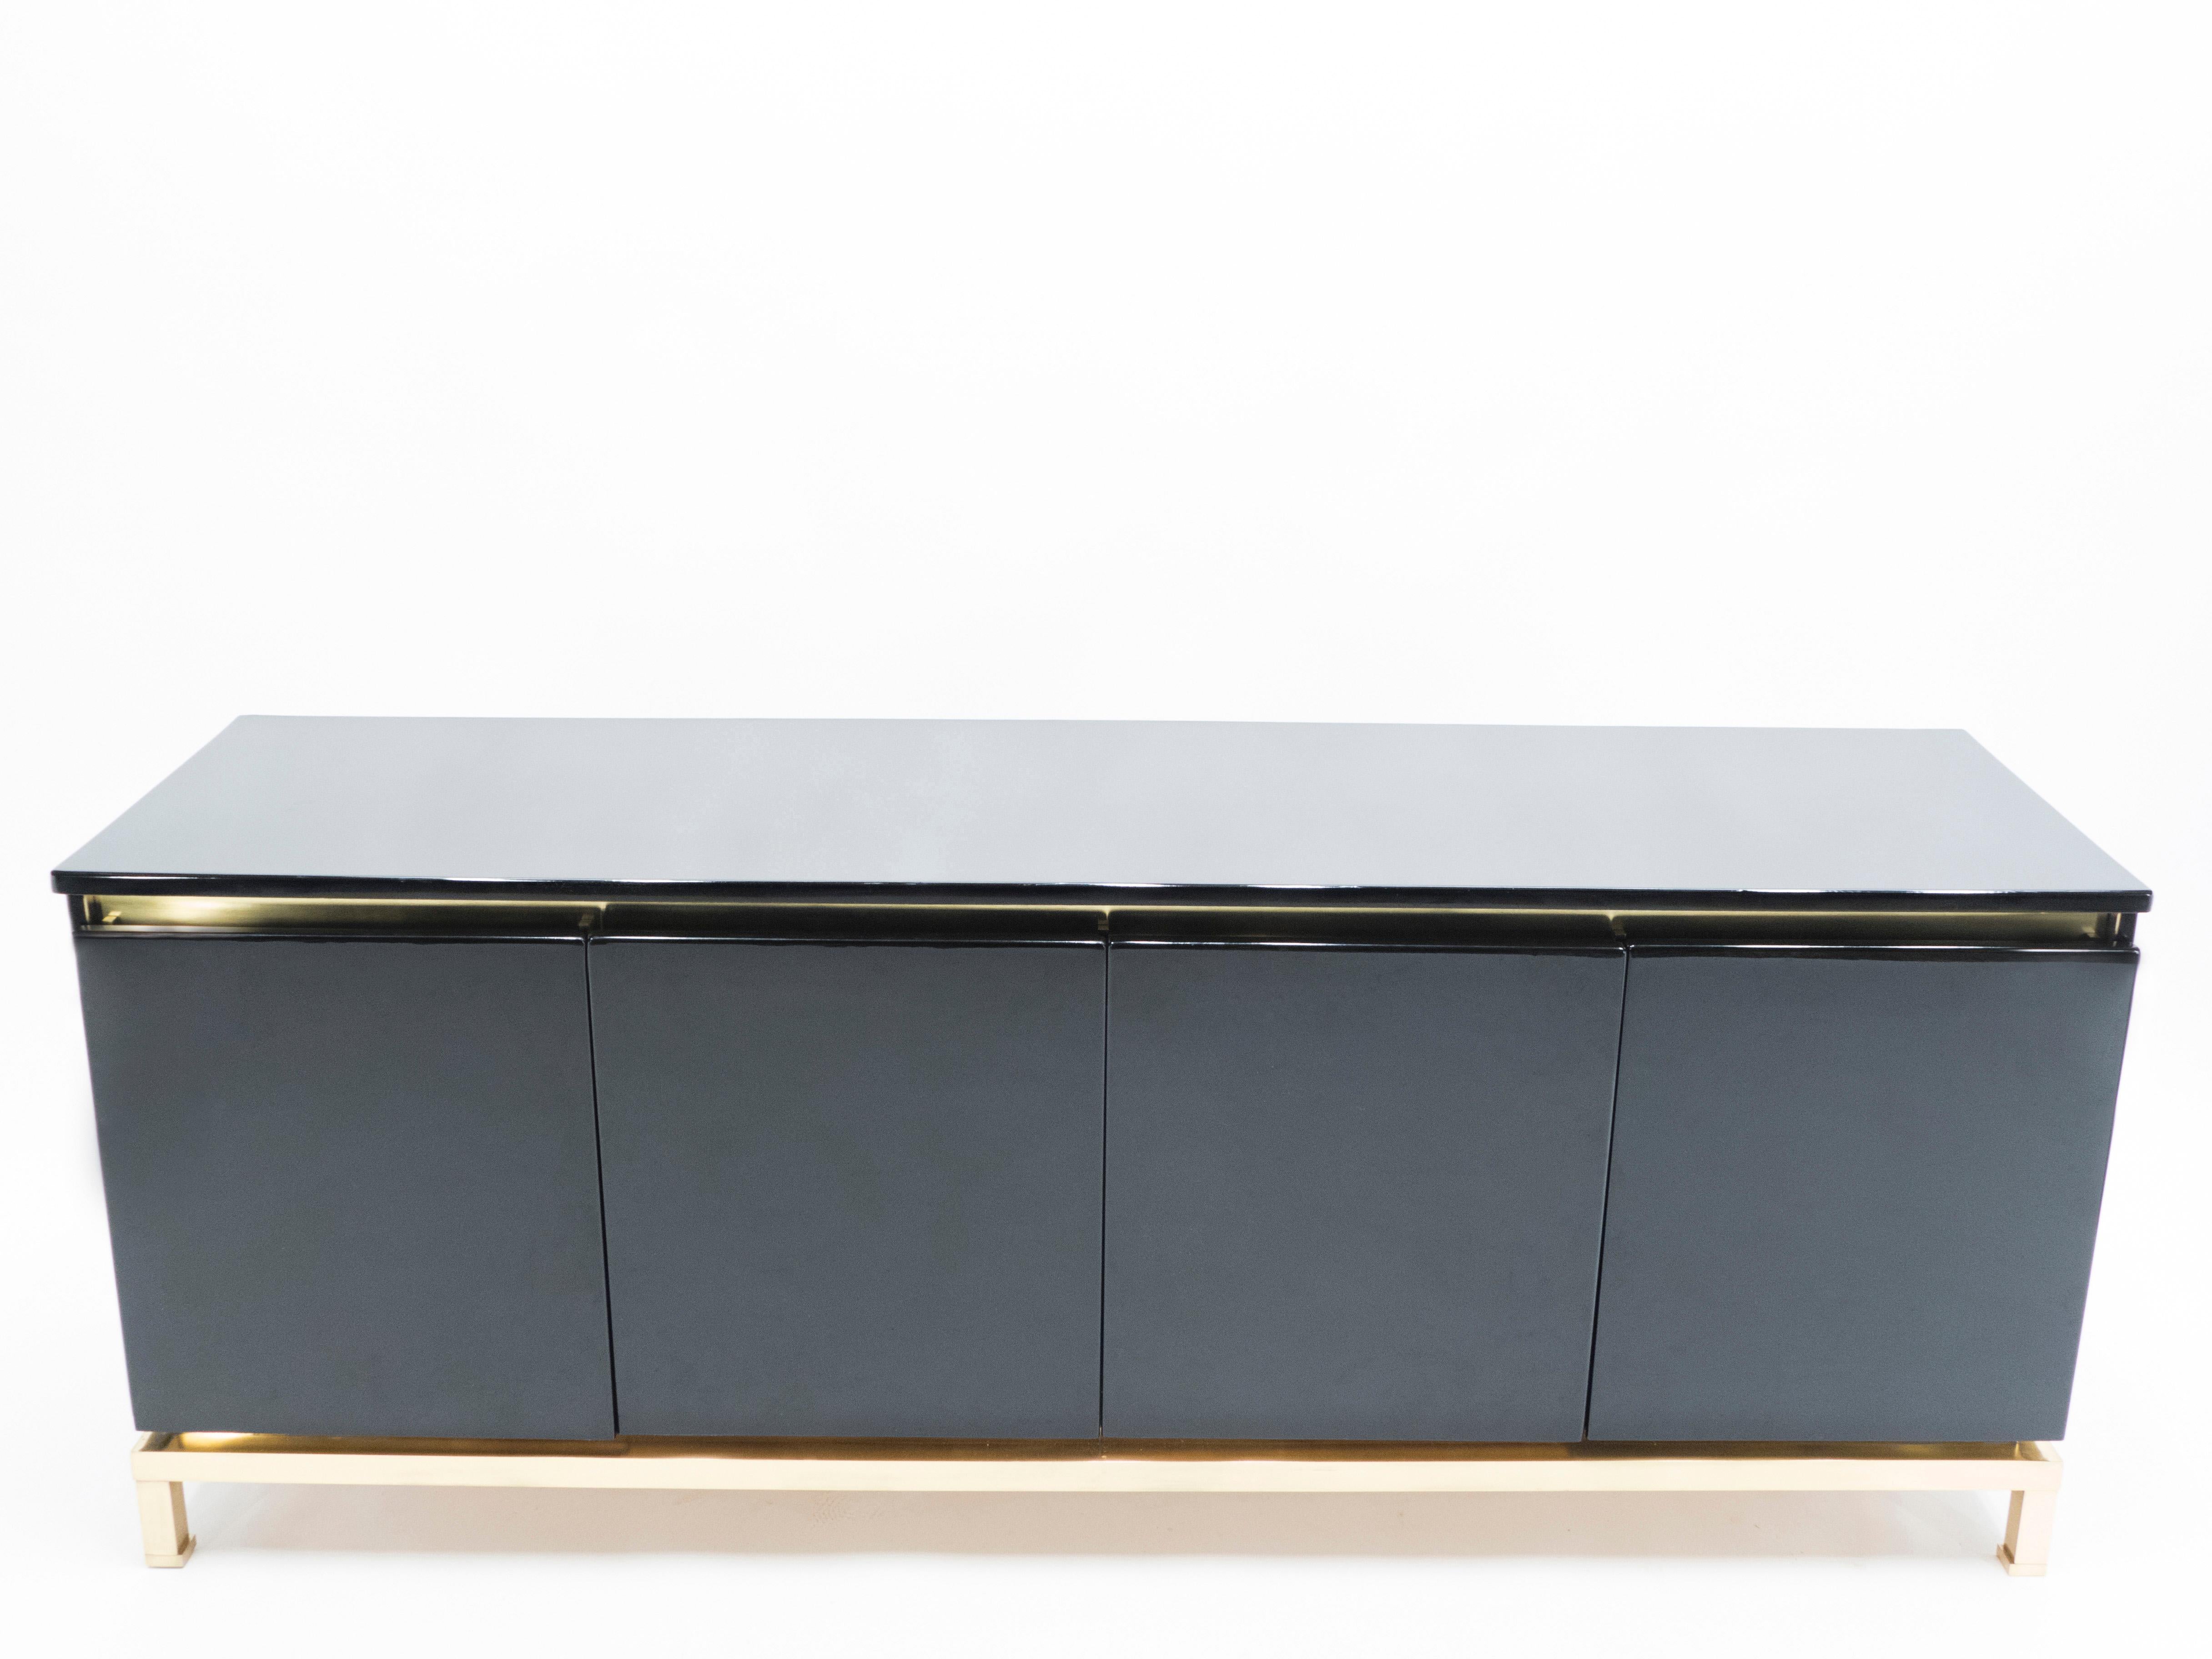 A timeless vintage piece, this midcentury sideboard feels imposing and glamourous, with thick, straight lines of brass adorning its exterior of reflective black lacquer. Glossy black lacquer, paired with bright brass accents en feet, feels crisp and